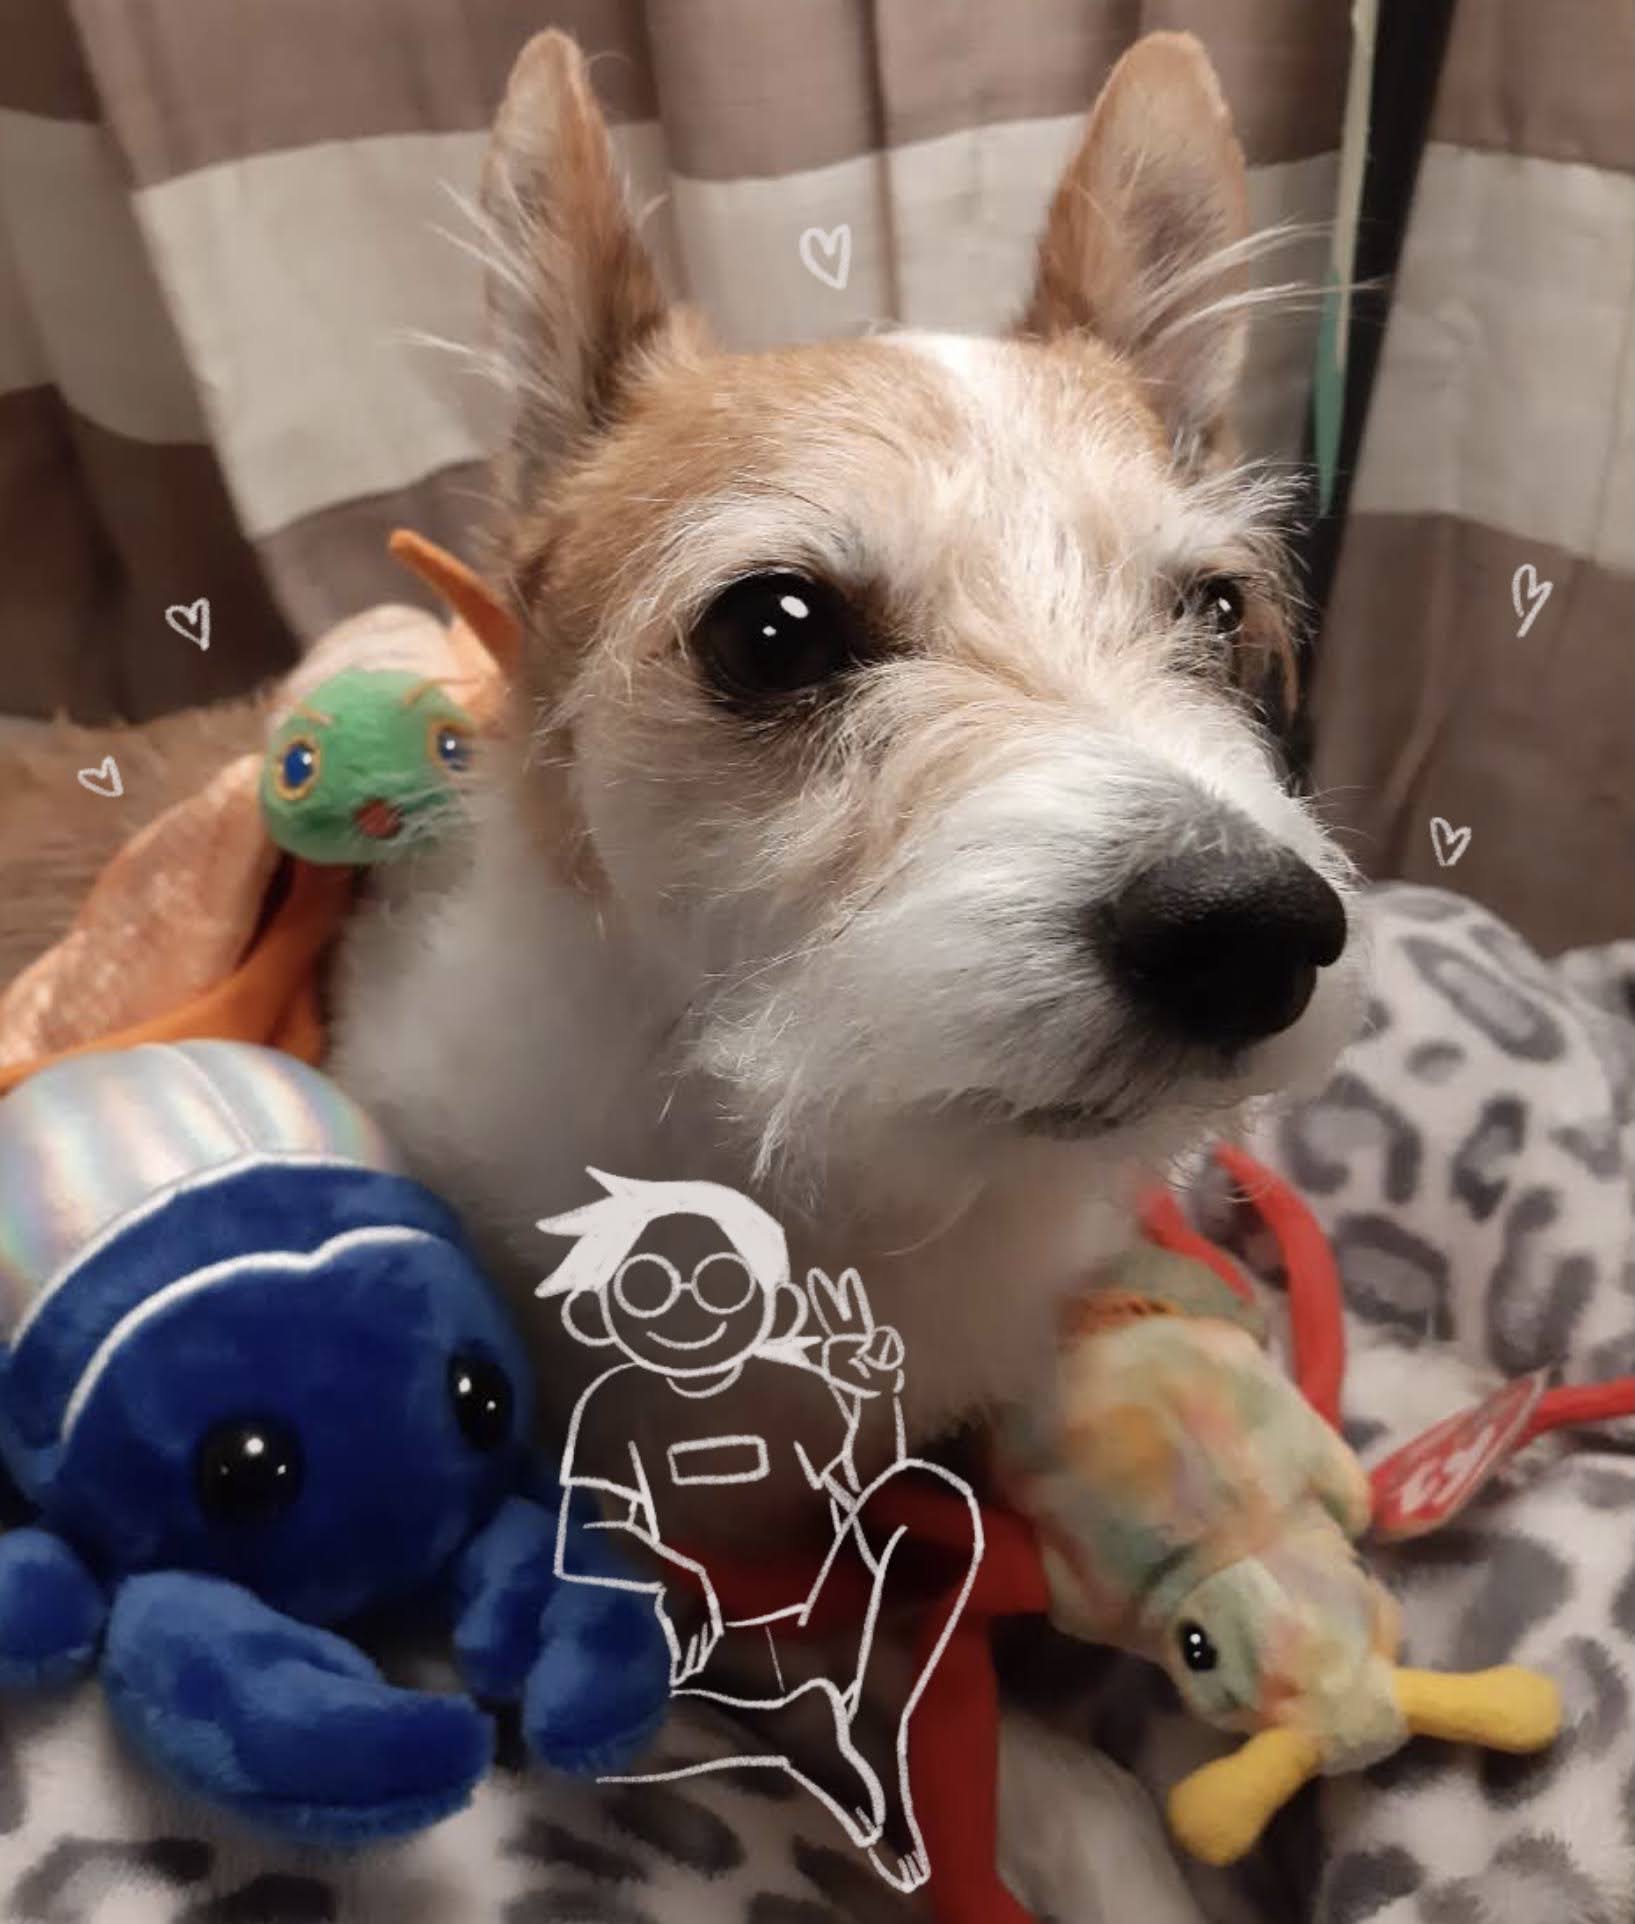 A small white and brown dog surrounded by bug beanie babies. There are little hearts, eye sparkles, and a small person holding up a peace sign drawn in white.